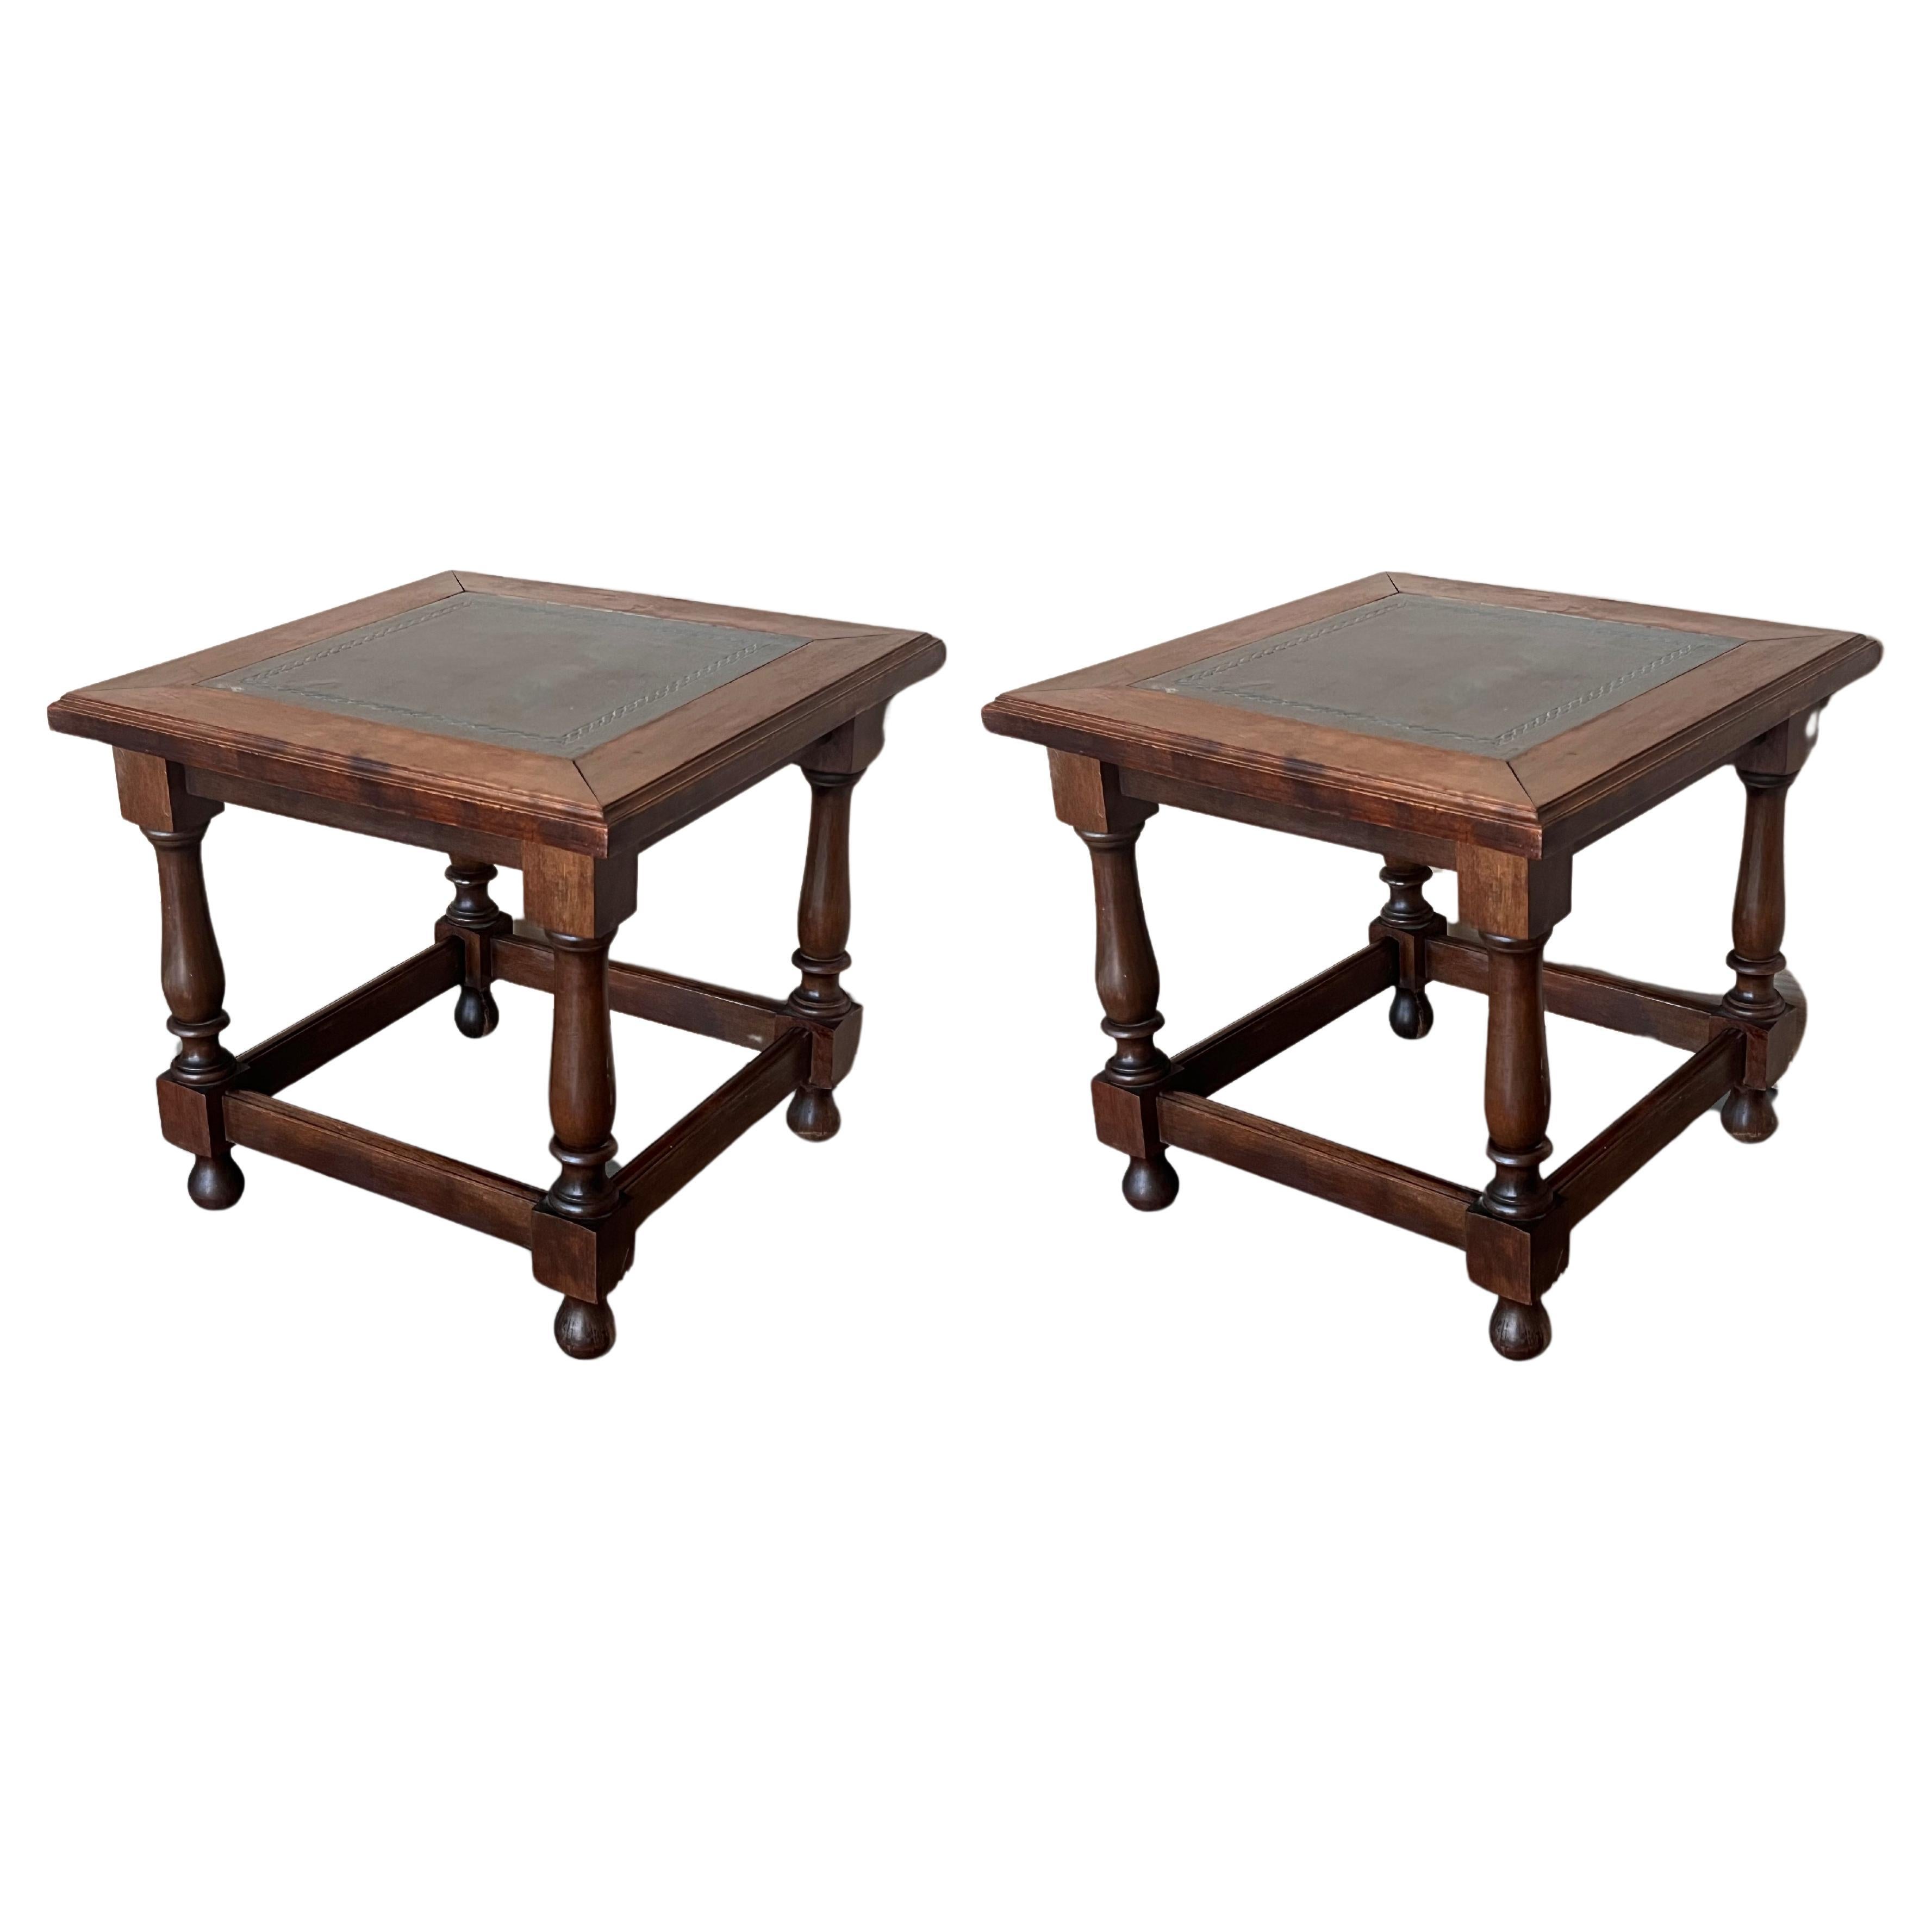 Pair of Spanish Walnut Side or Coffee Tables with leather top